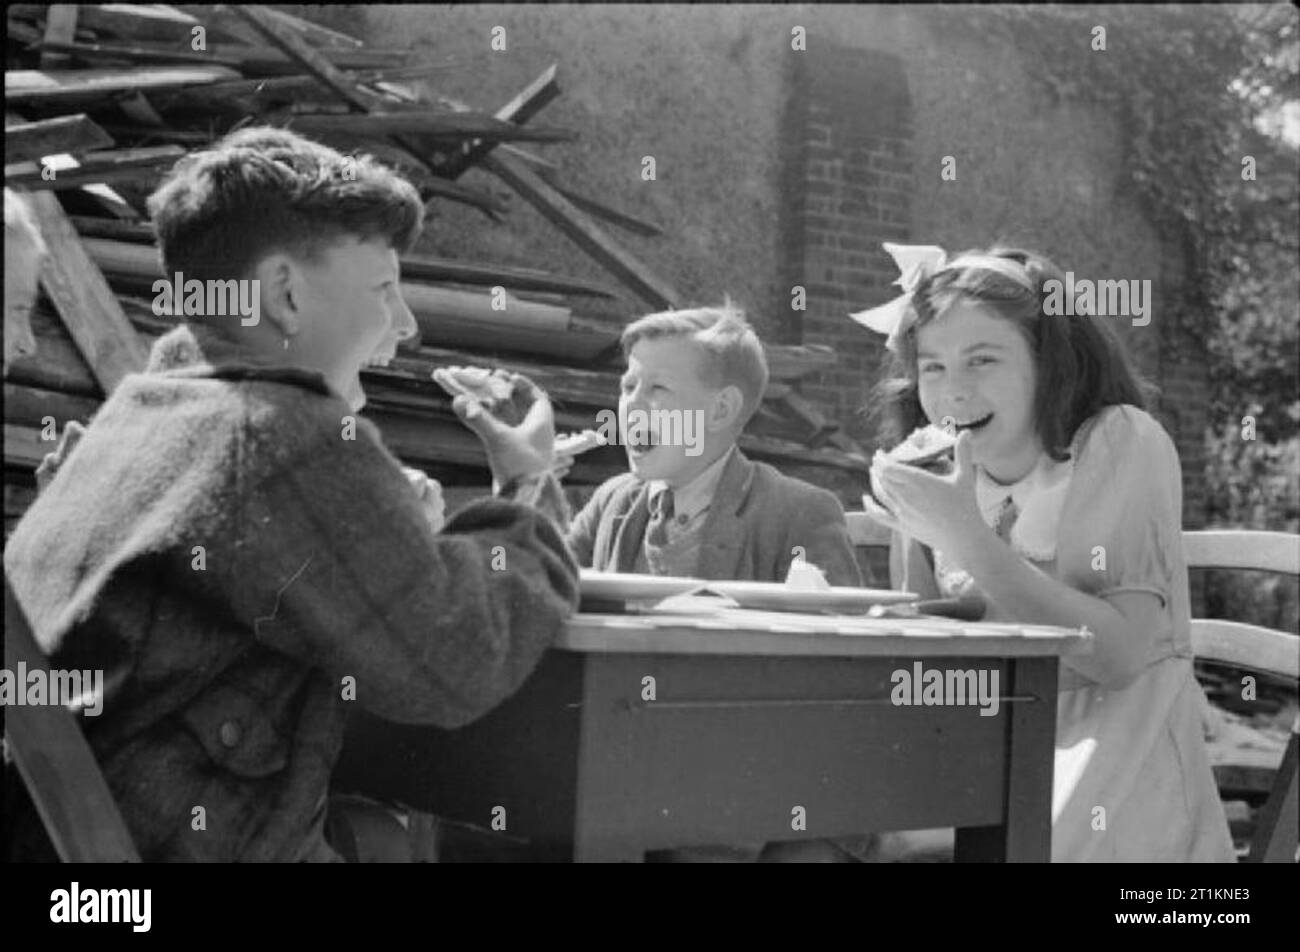 Aid From America- Lend-lease Food, London, England, 1941 A group of smiling children sit at a table and eat cheese imported from America as part of the Lend-Lease scheme in the playground of a severely bomb-damaged school. The school is now being used as a feeding centre. Piles of salvaged wood can be seen just behind the children. This photograph was probably taken in late August or early September 1941. Stock Photo